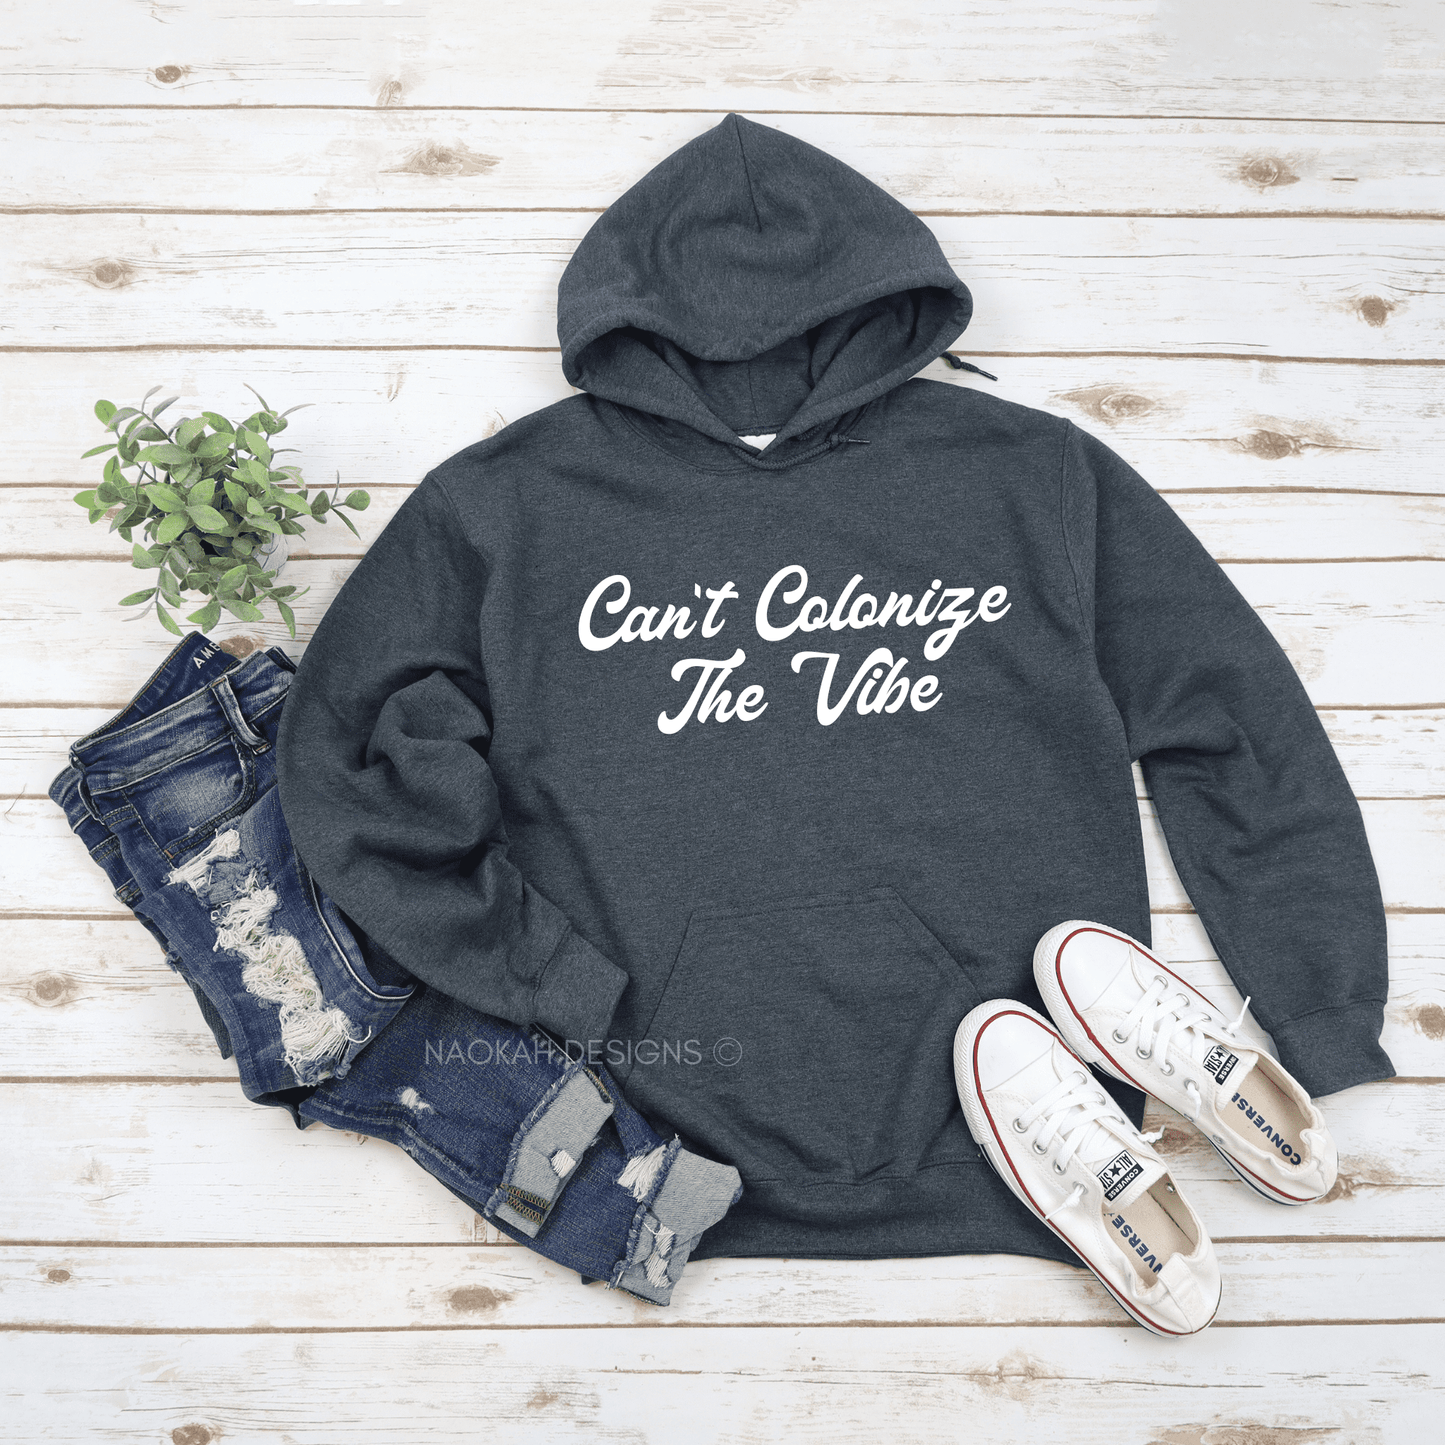 Can’t colonize the vibe sweatshirt hoodie, hey colonizer shirt, decolonize shirt, this is native land shirt, Land Back shirt, land back indigenous shirt, native land shirt, no one is illegal on native land shirt, Indigenous pride, resistance, indigenous lives matter shirt, decolonize education shirt, Native shirt, Equal Rights Shirt, Equality, Indigenous AF, Phenomenally Indigenous T-Shirt